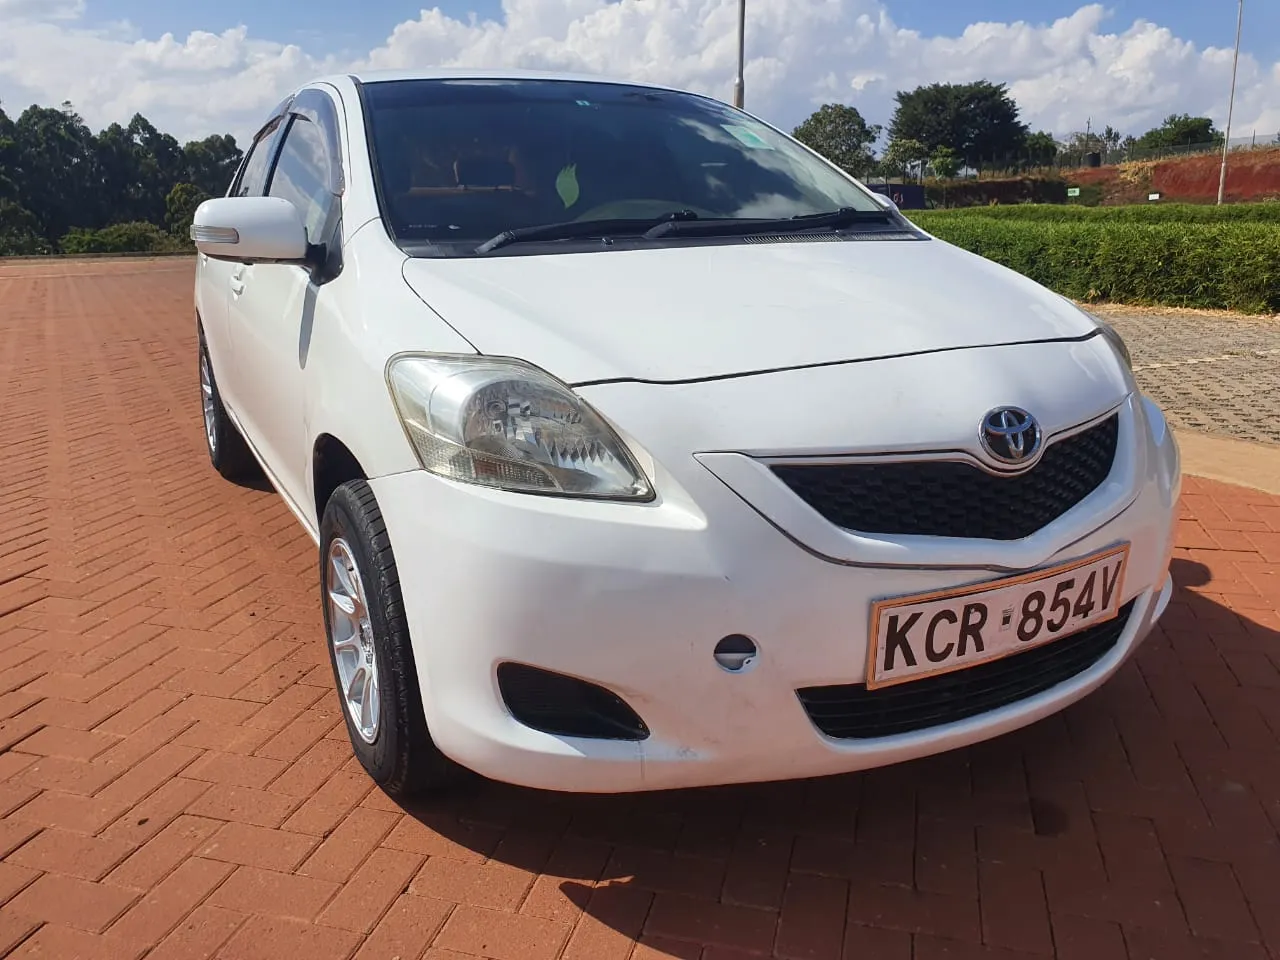 Toyota BELTA QUICK SALE You Pay 30% Deposit Trade in OK Wow